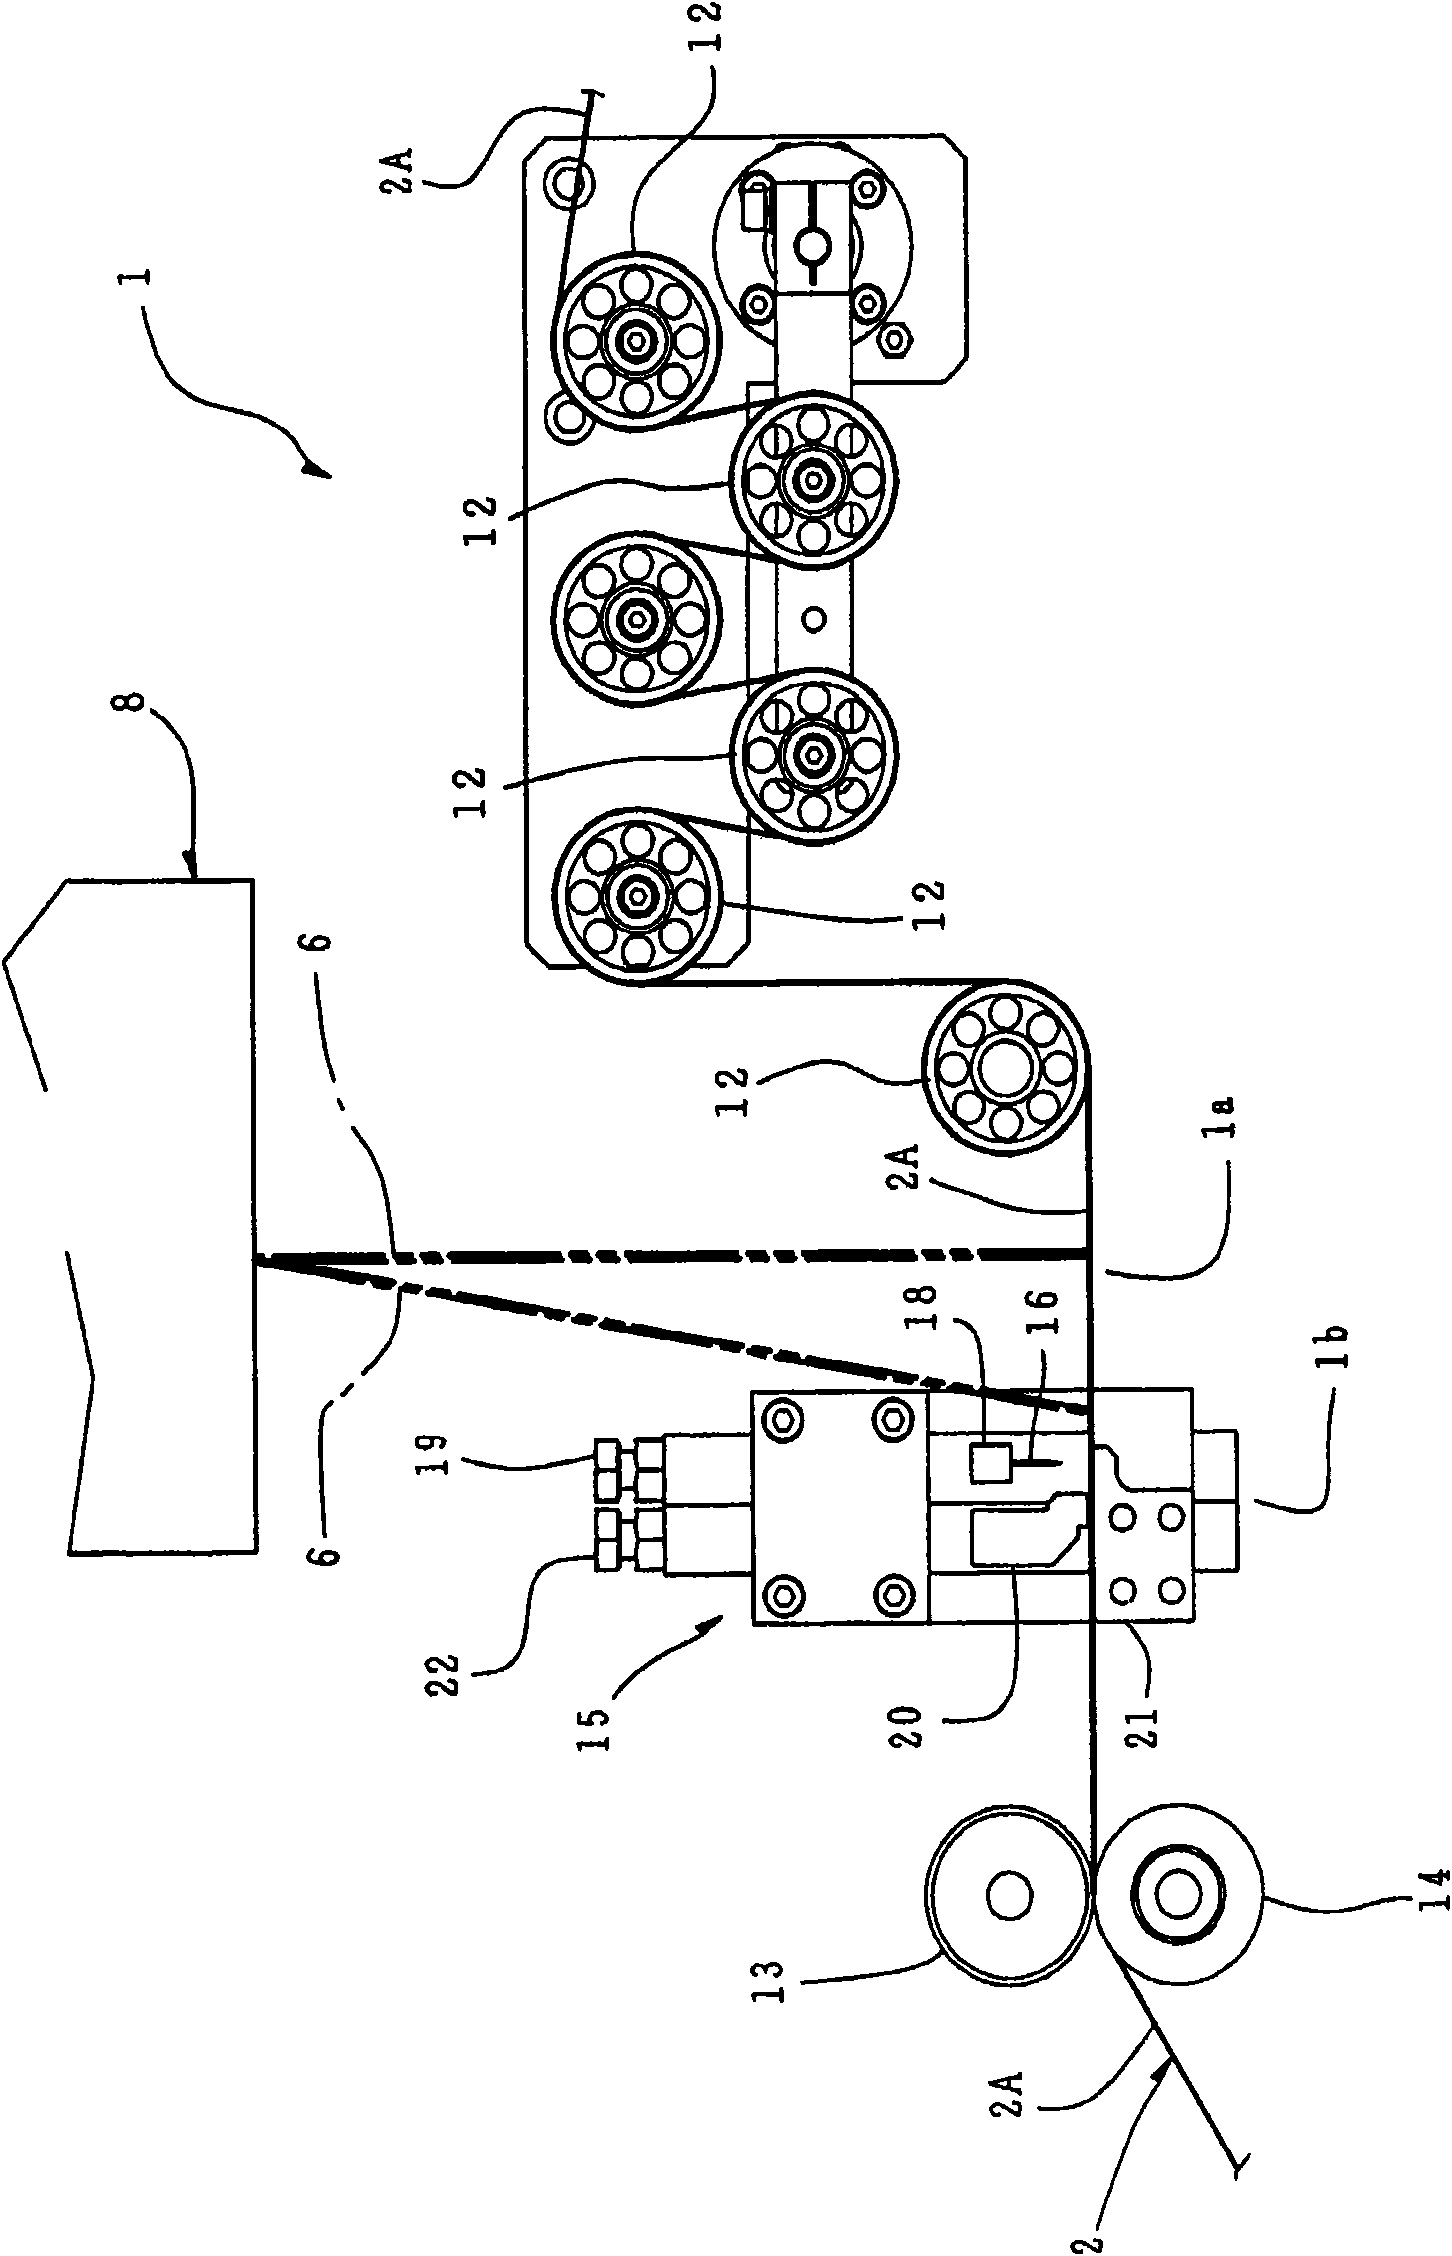 Production method and device of electronic components